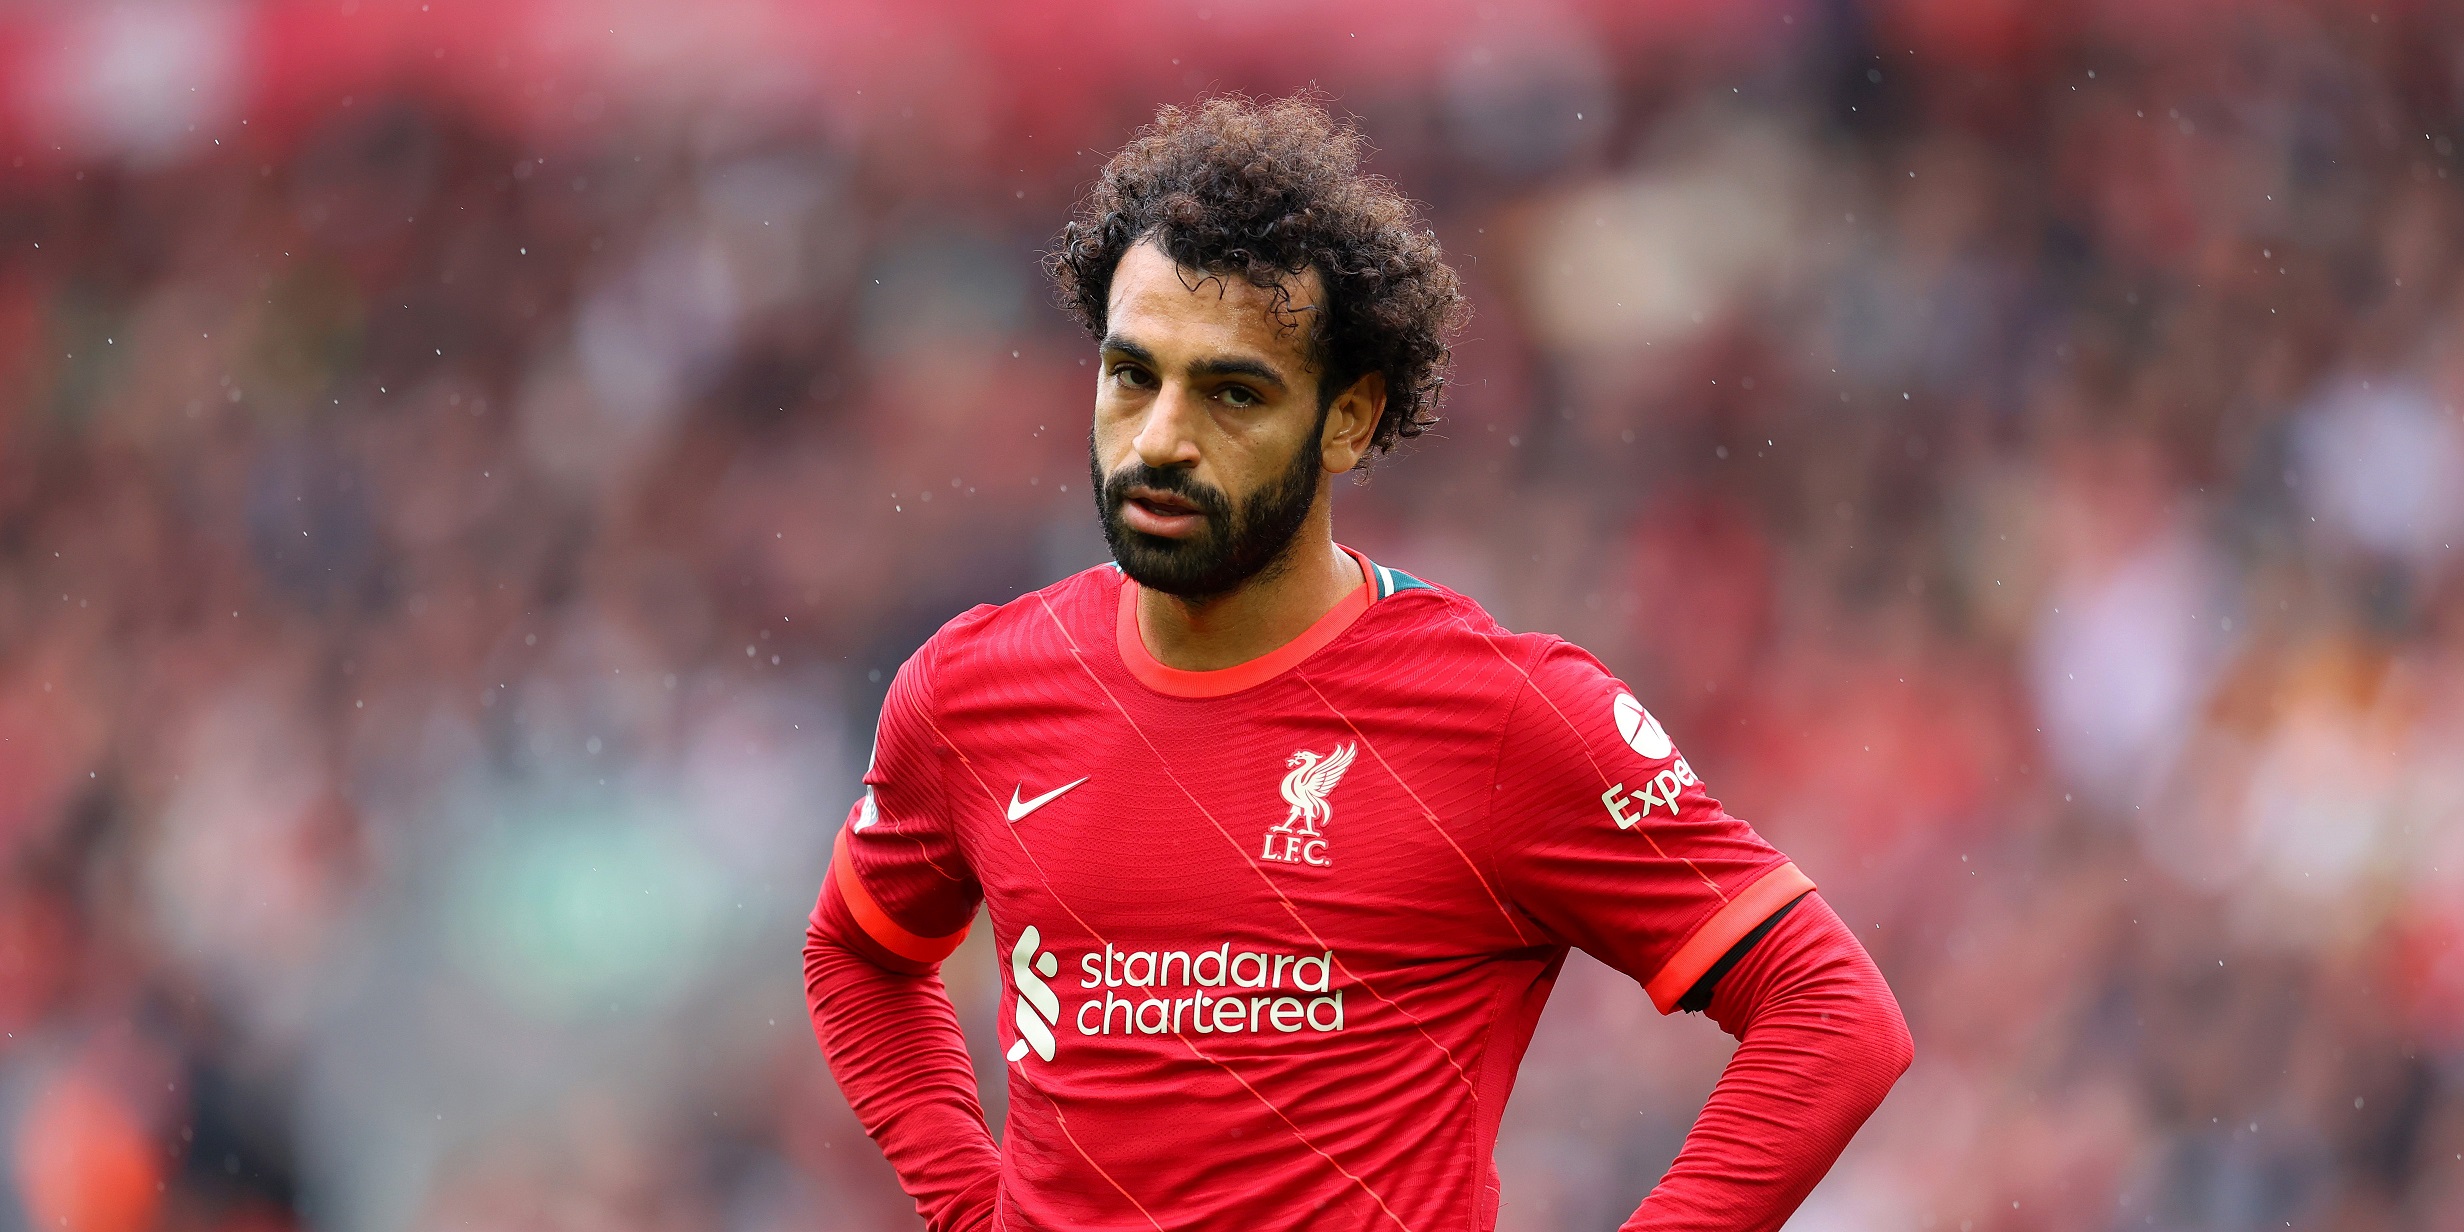 Klopp explains why Mo Salah was ‘angry’ after Merseyside derby despite his Man of the Match performance